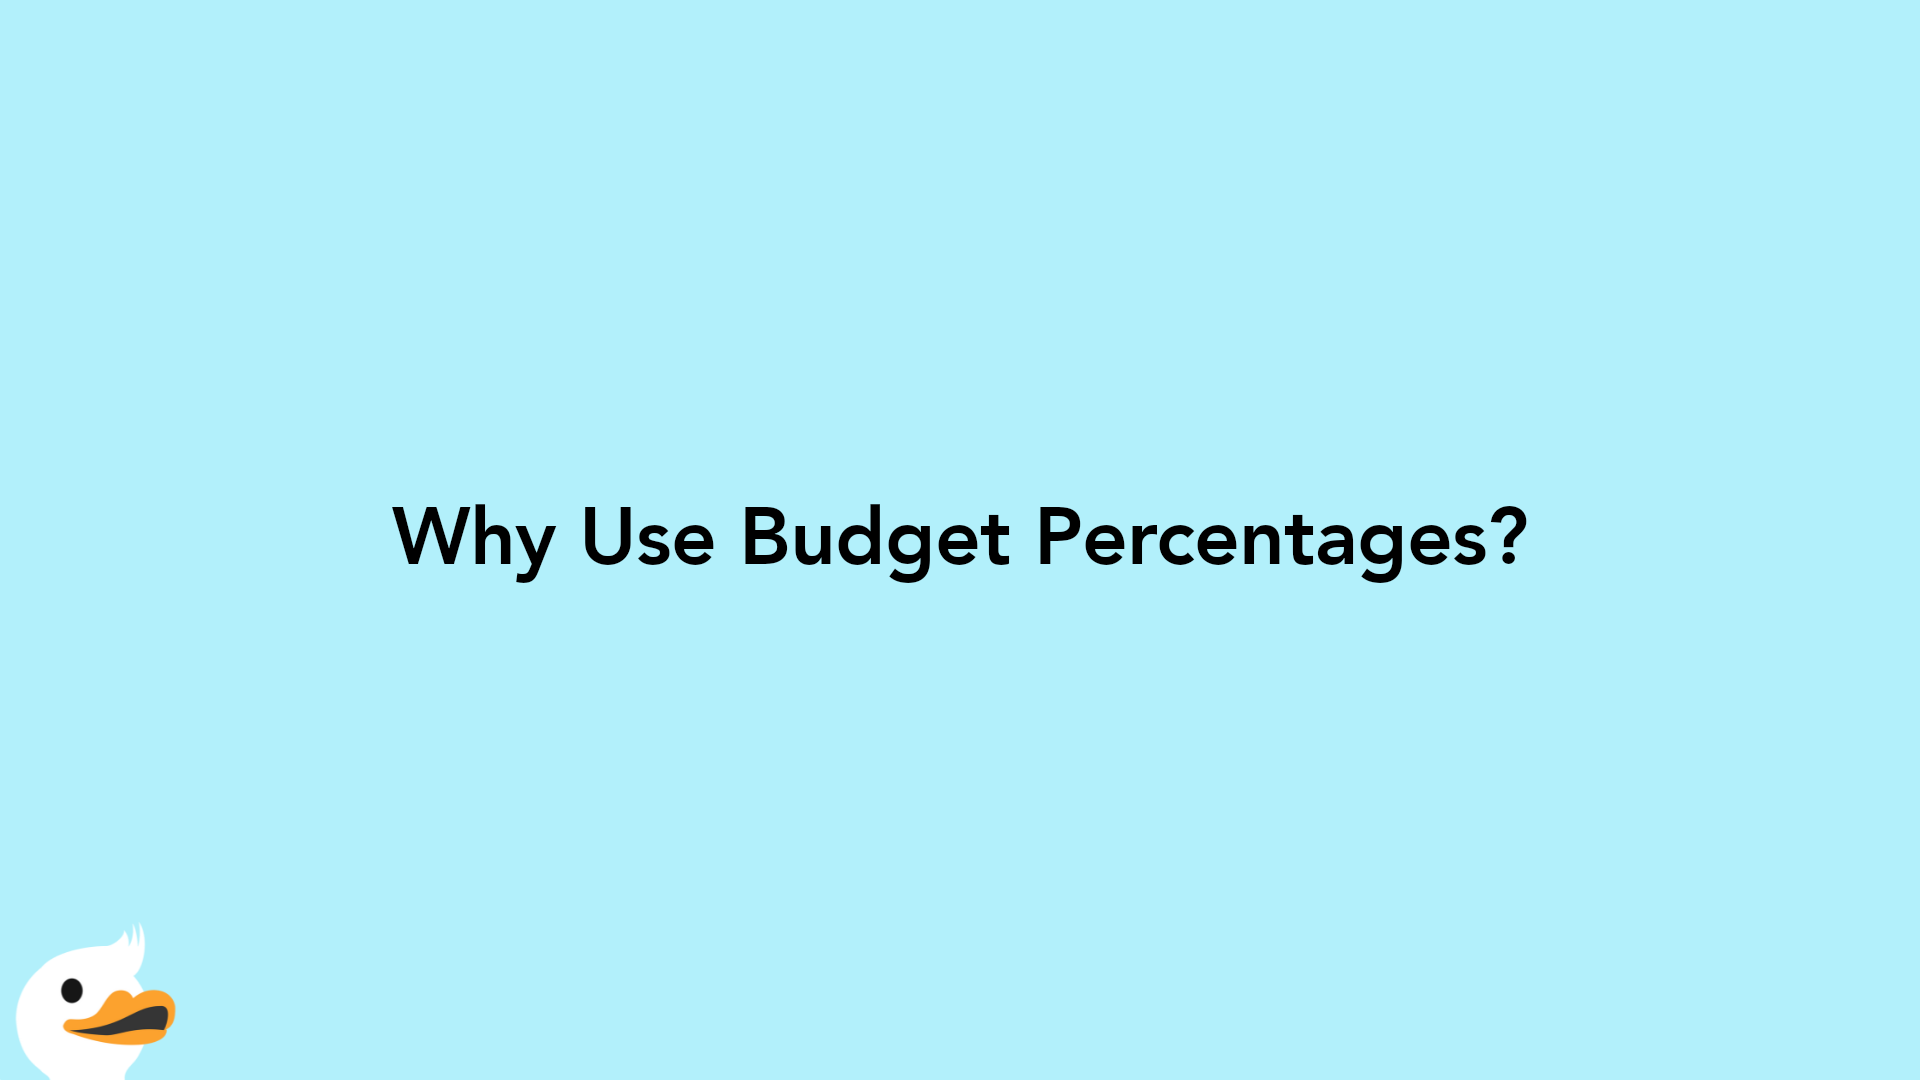 Why Use Budget Percentages?